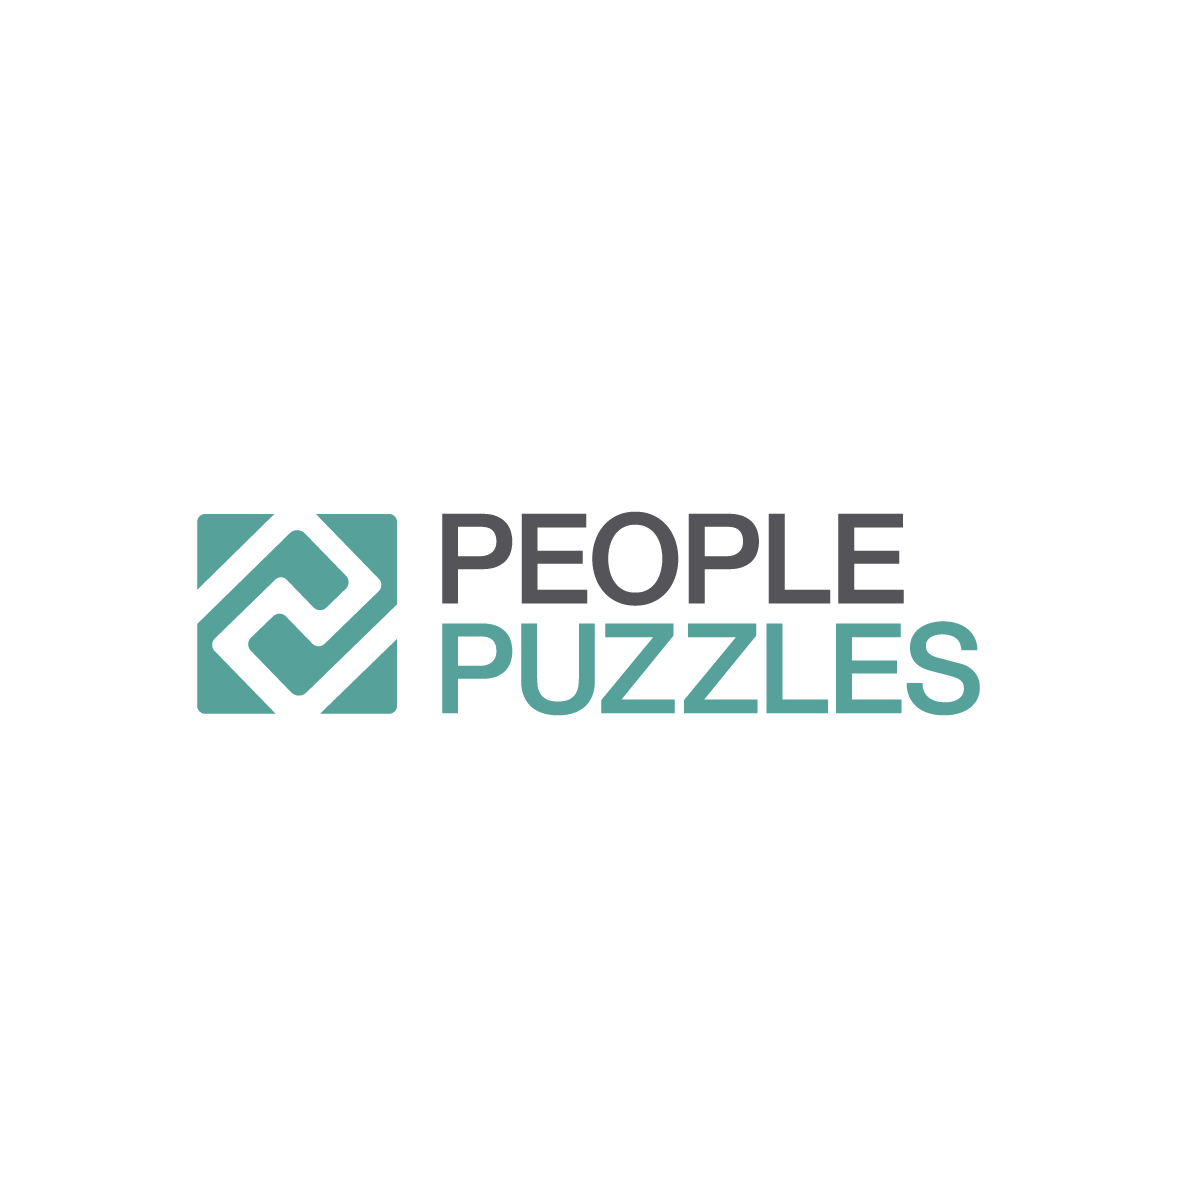 PEOPLE PUZZLES - LOGO_NEW7473-03